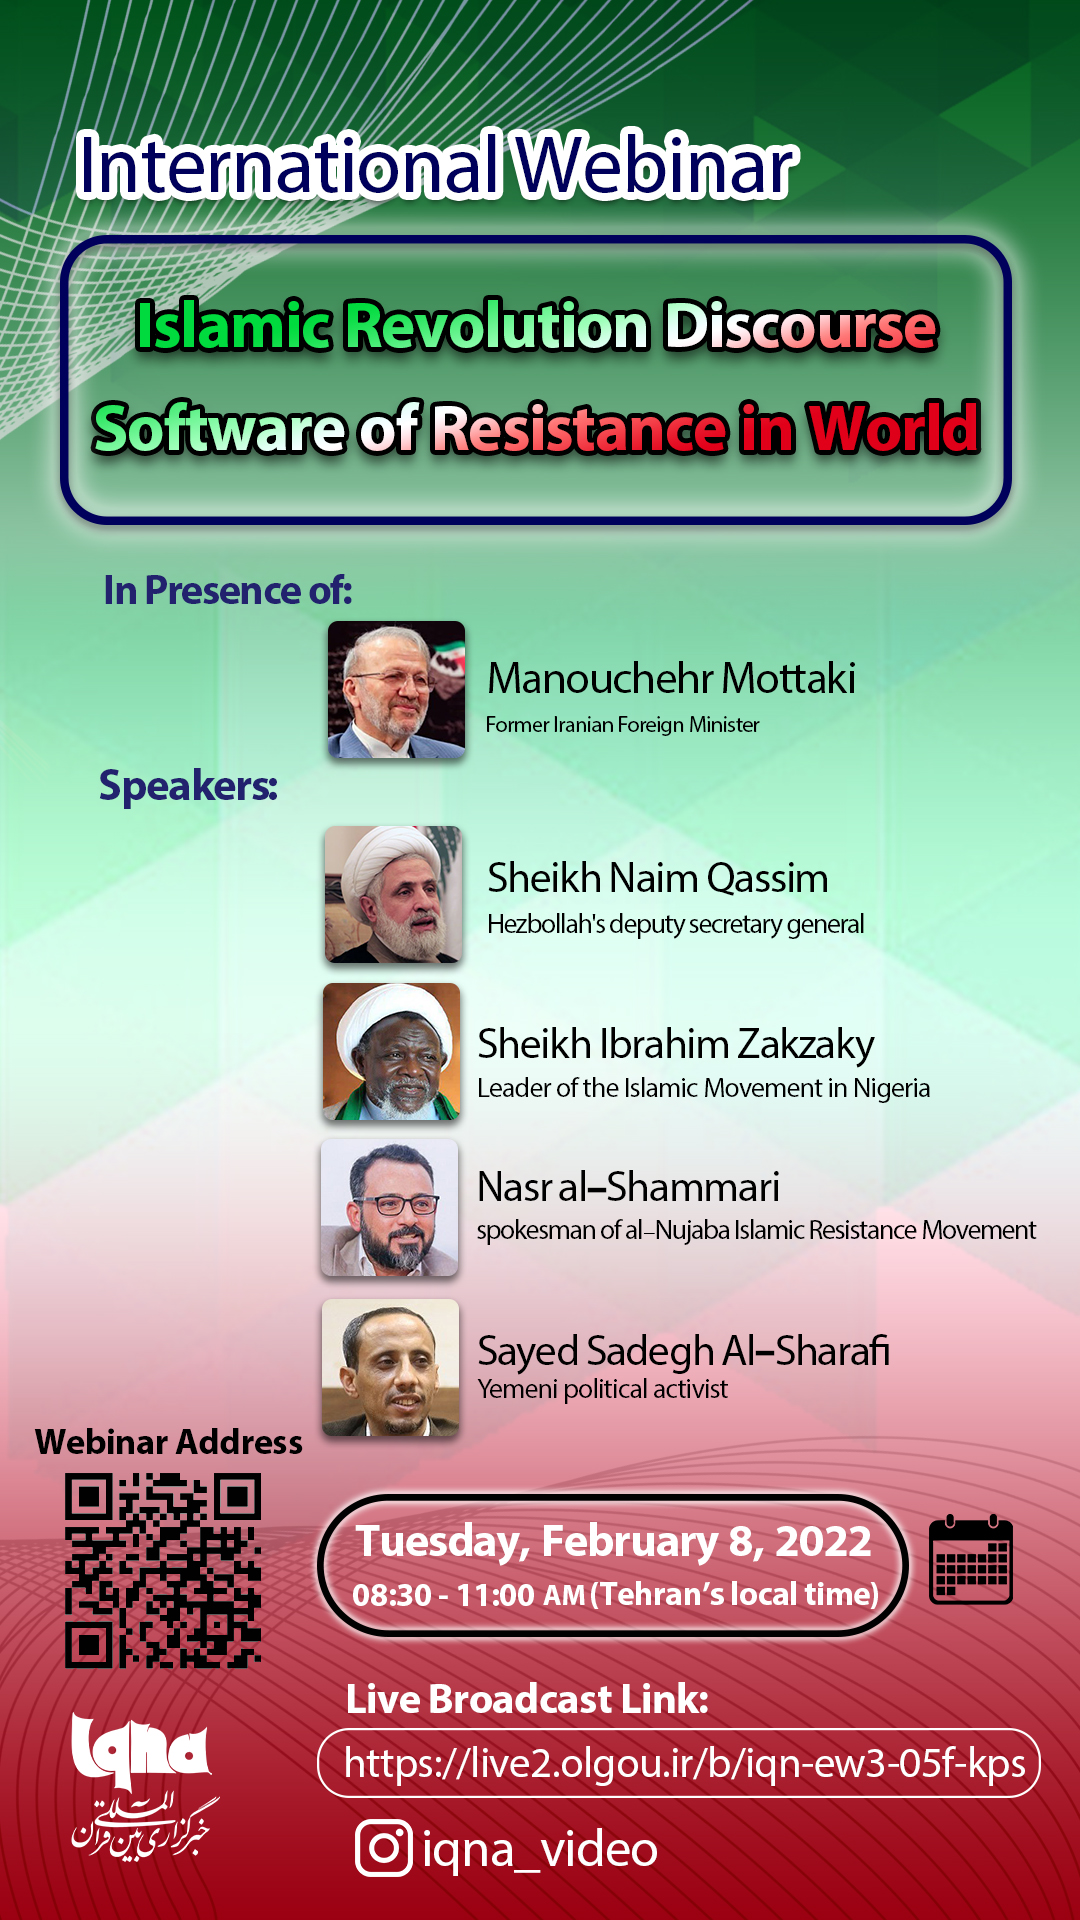 IQNA to Host Int’l Webinar about Islamic Revolution